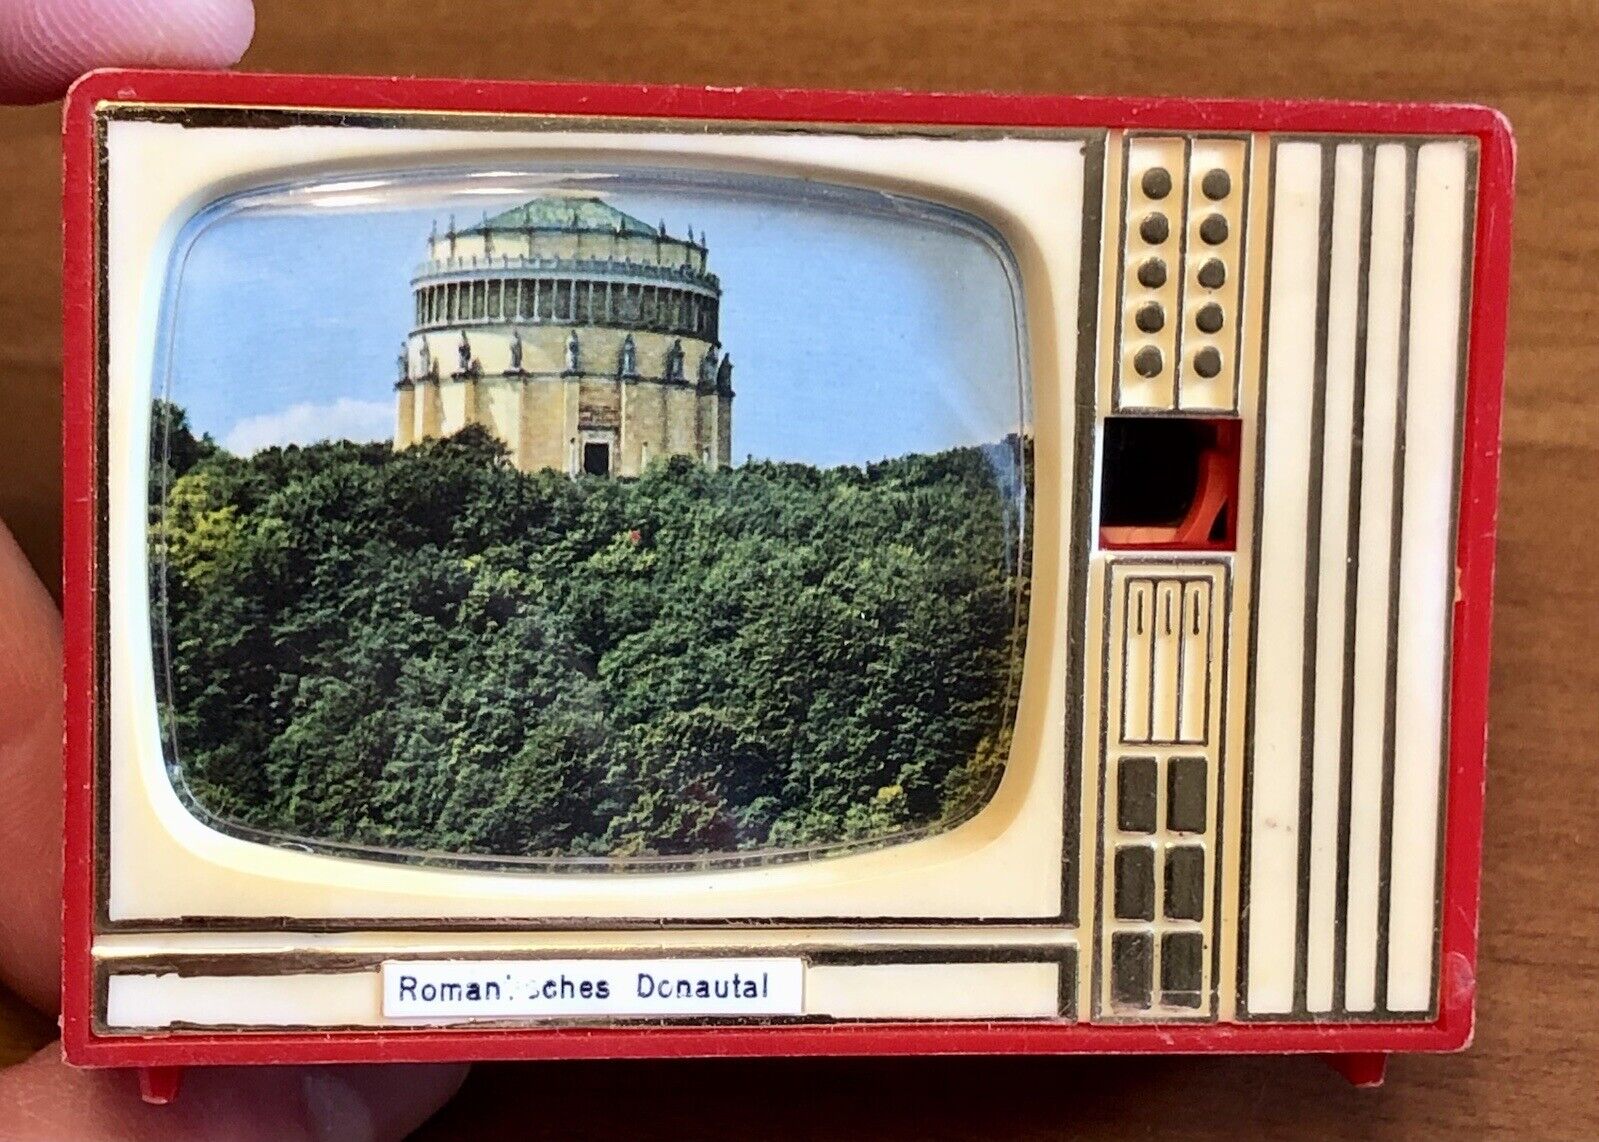 VTG Western Germany Romantisches Donautal Castle Viewfinder Pic Television READ